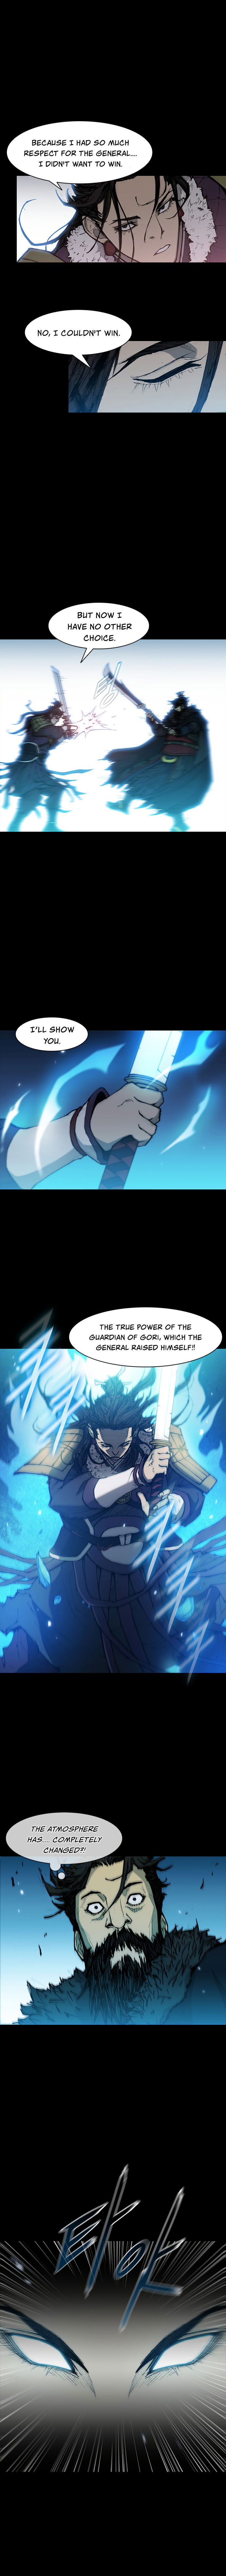 long-way-of-the-warrior-chap-34-6